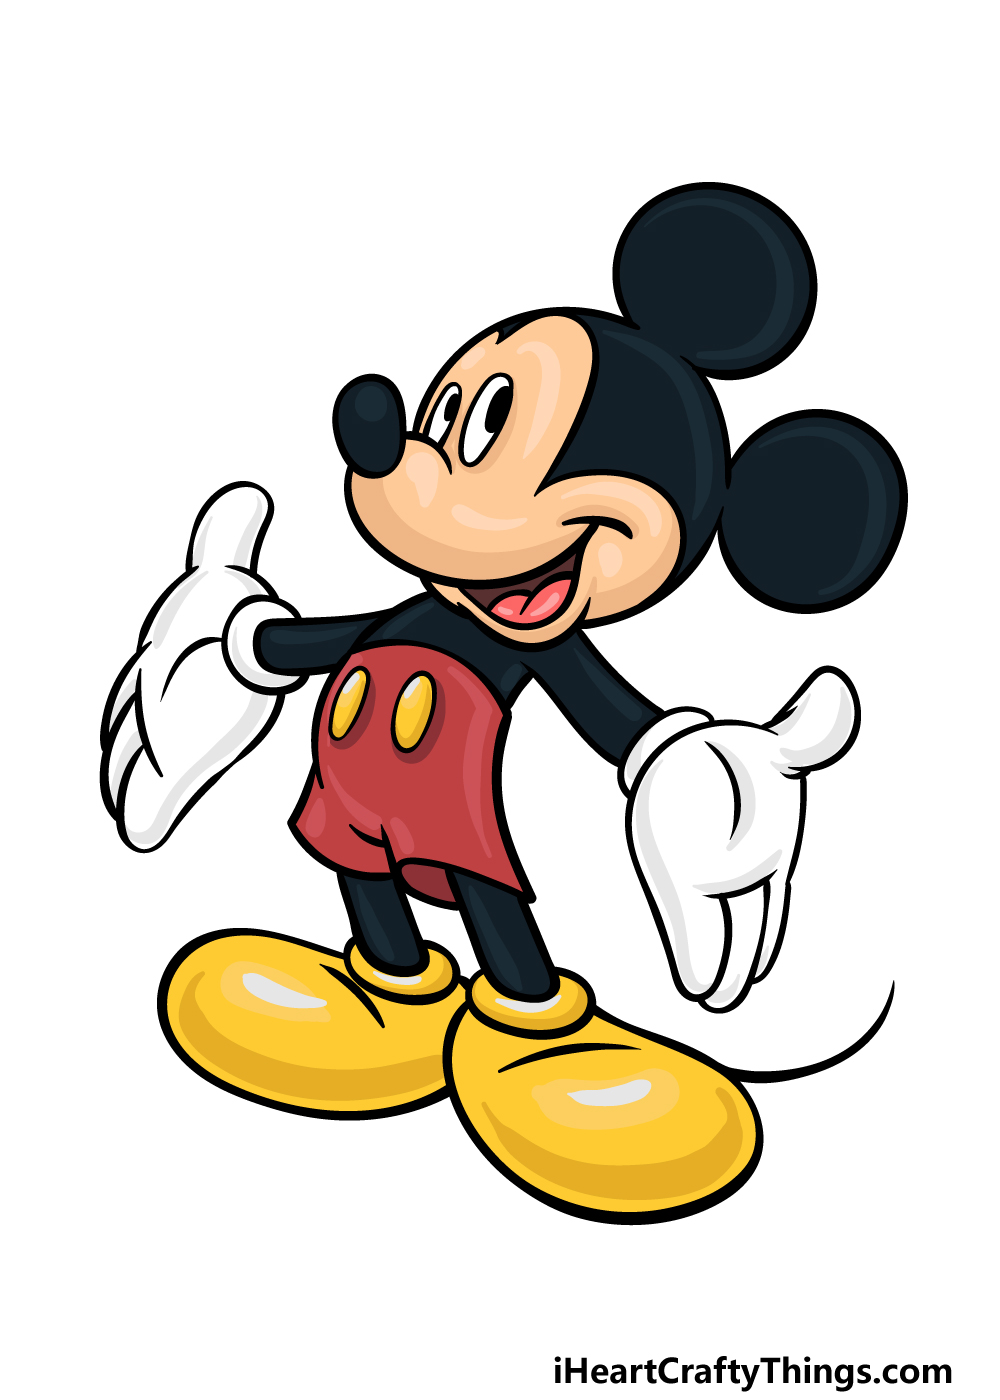 How to draw winking Mickey Mouse - Sketchok easy drawing guides-saigonsouth.com.vn